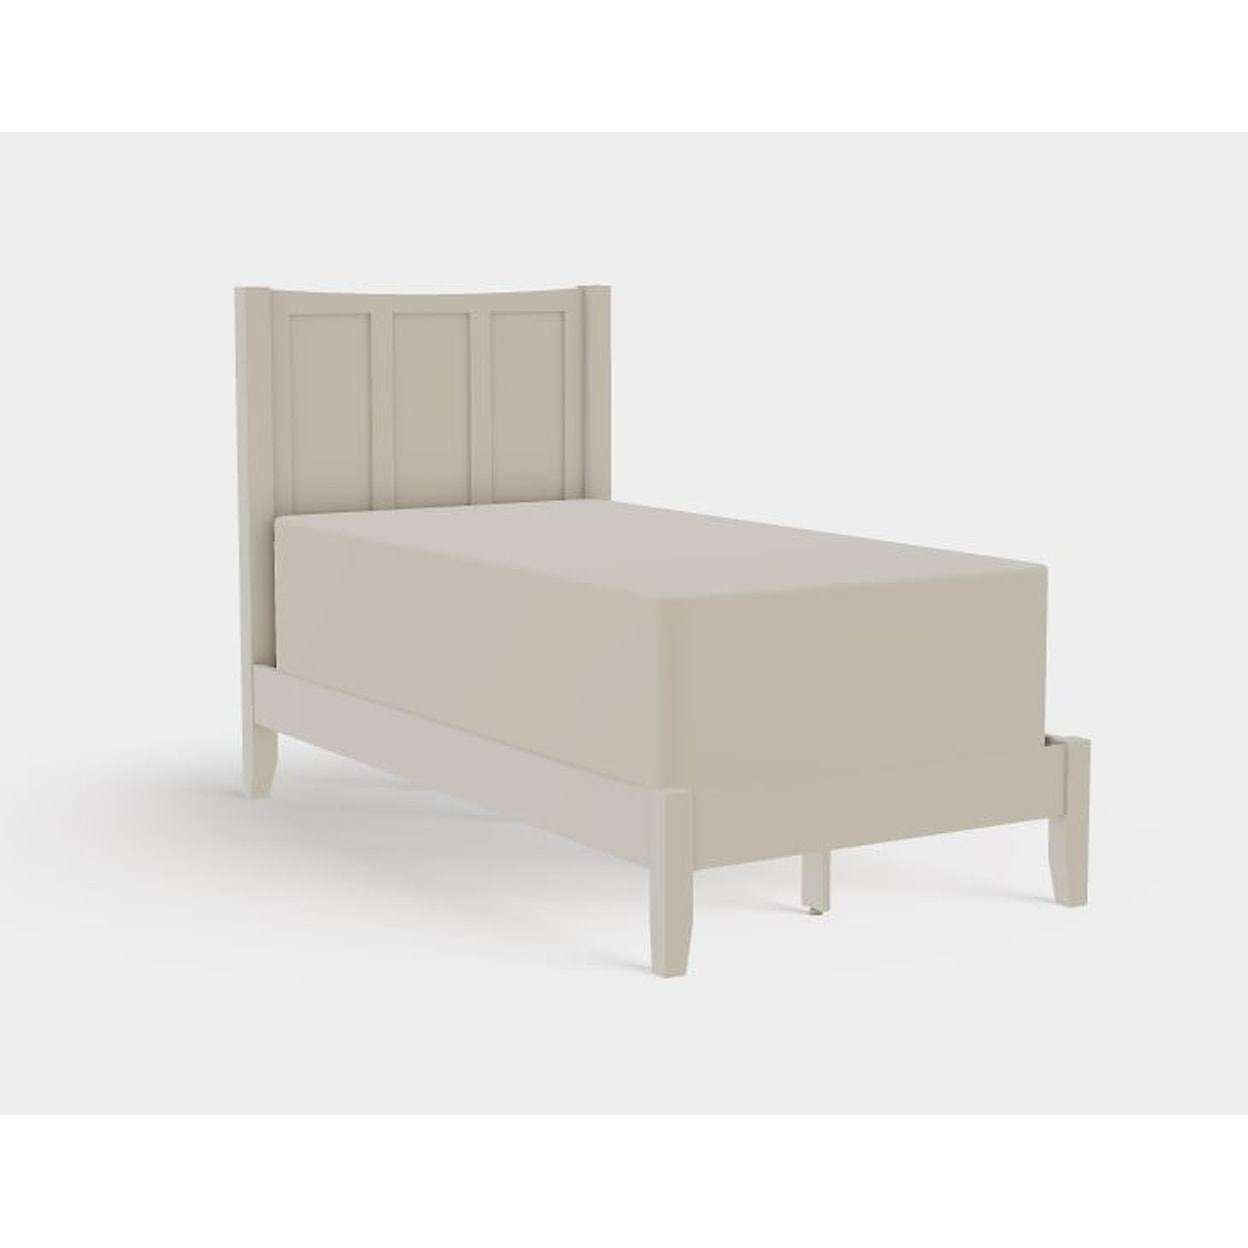 Mavin Atwood Group Atwood Twin XL Rail System Panel Bed